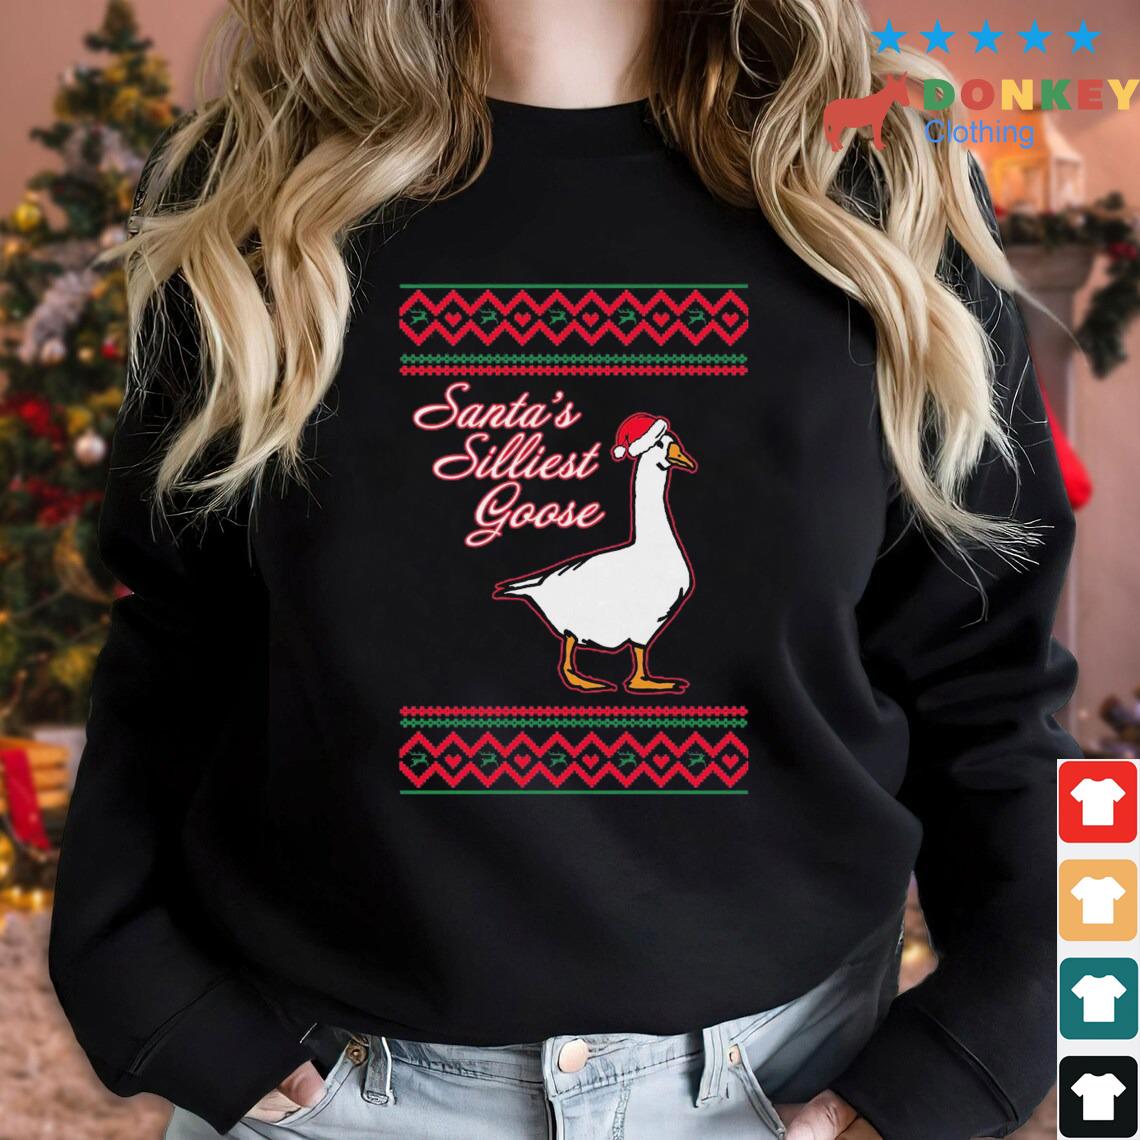 Santa's Silliest Goose Ugly Christmas Sweater